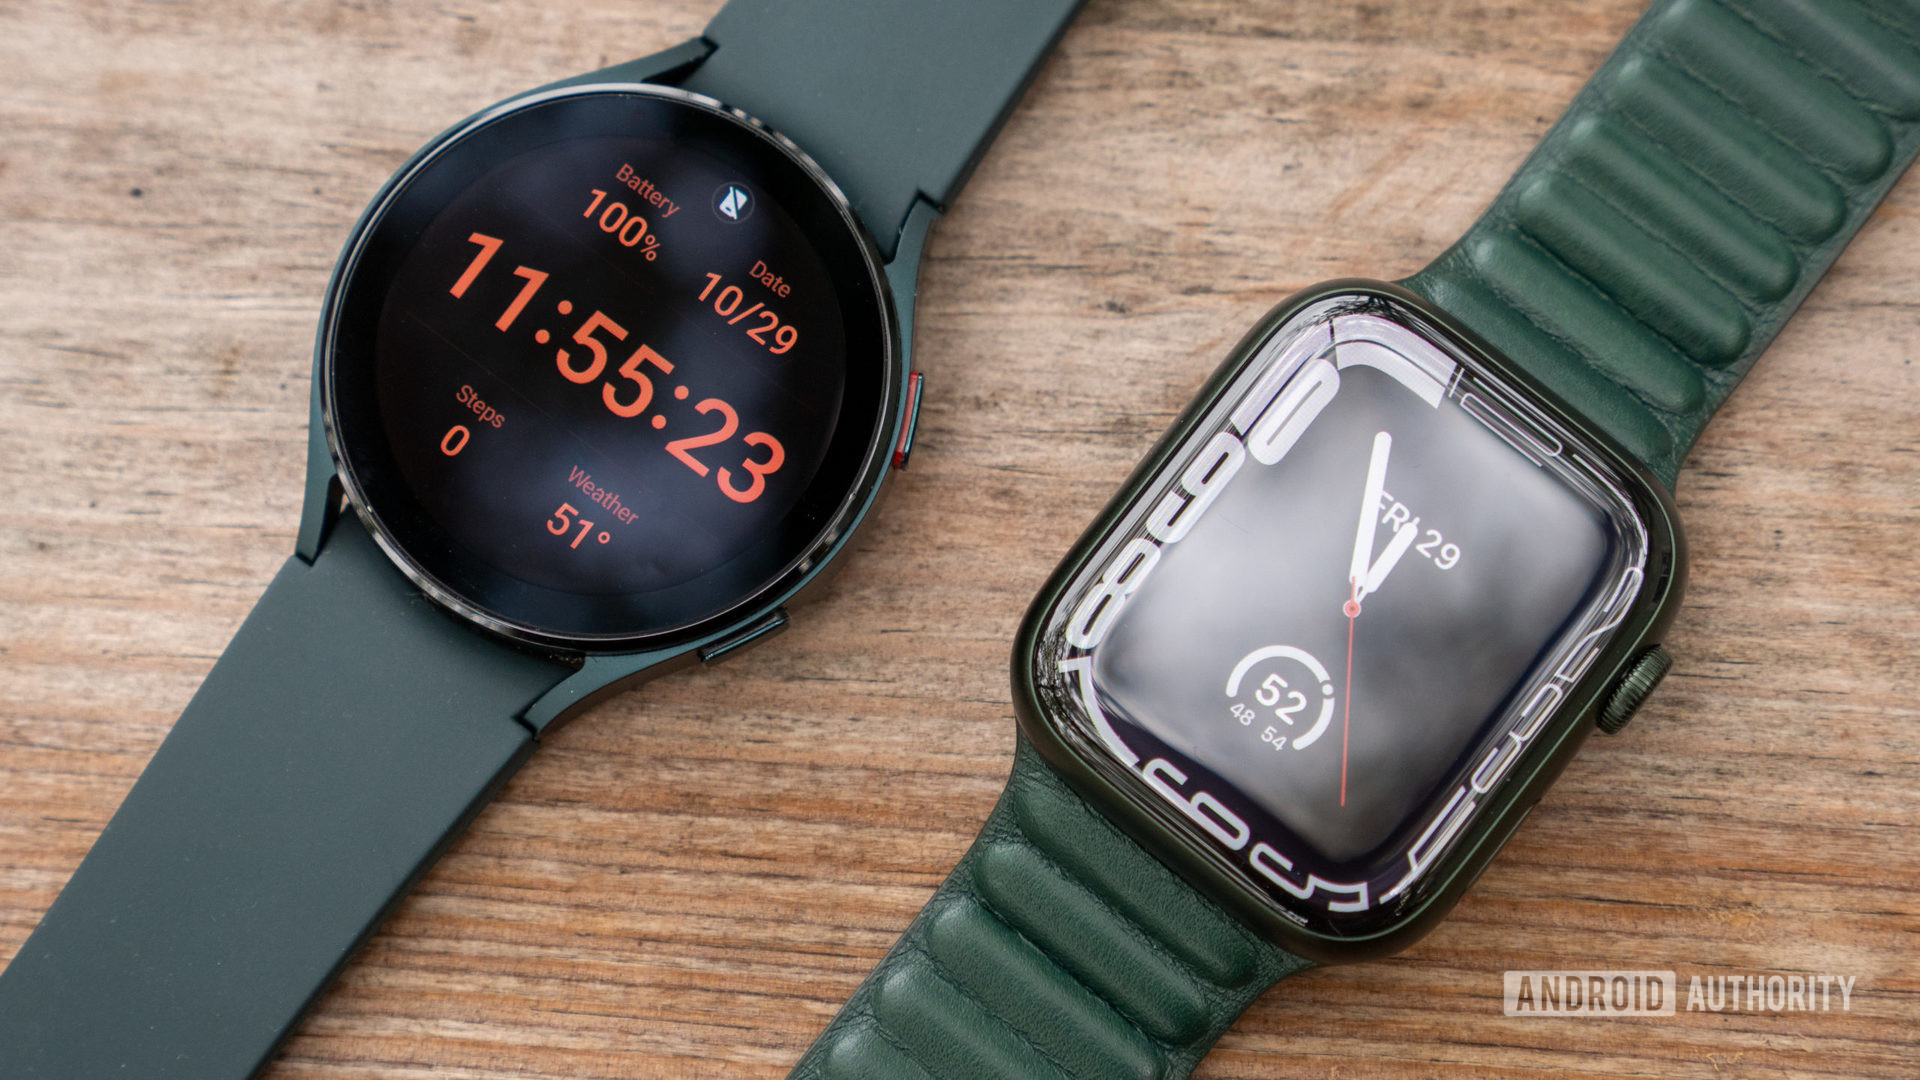 An image of the Apple Watch Series 7 vs the Samsung Galaxy Watch 4